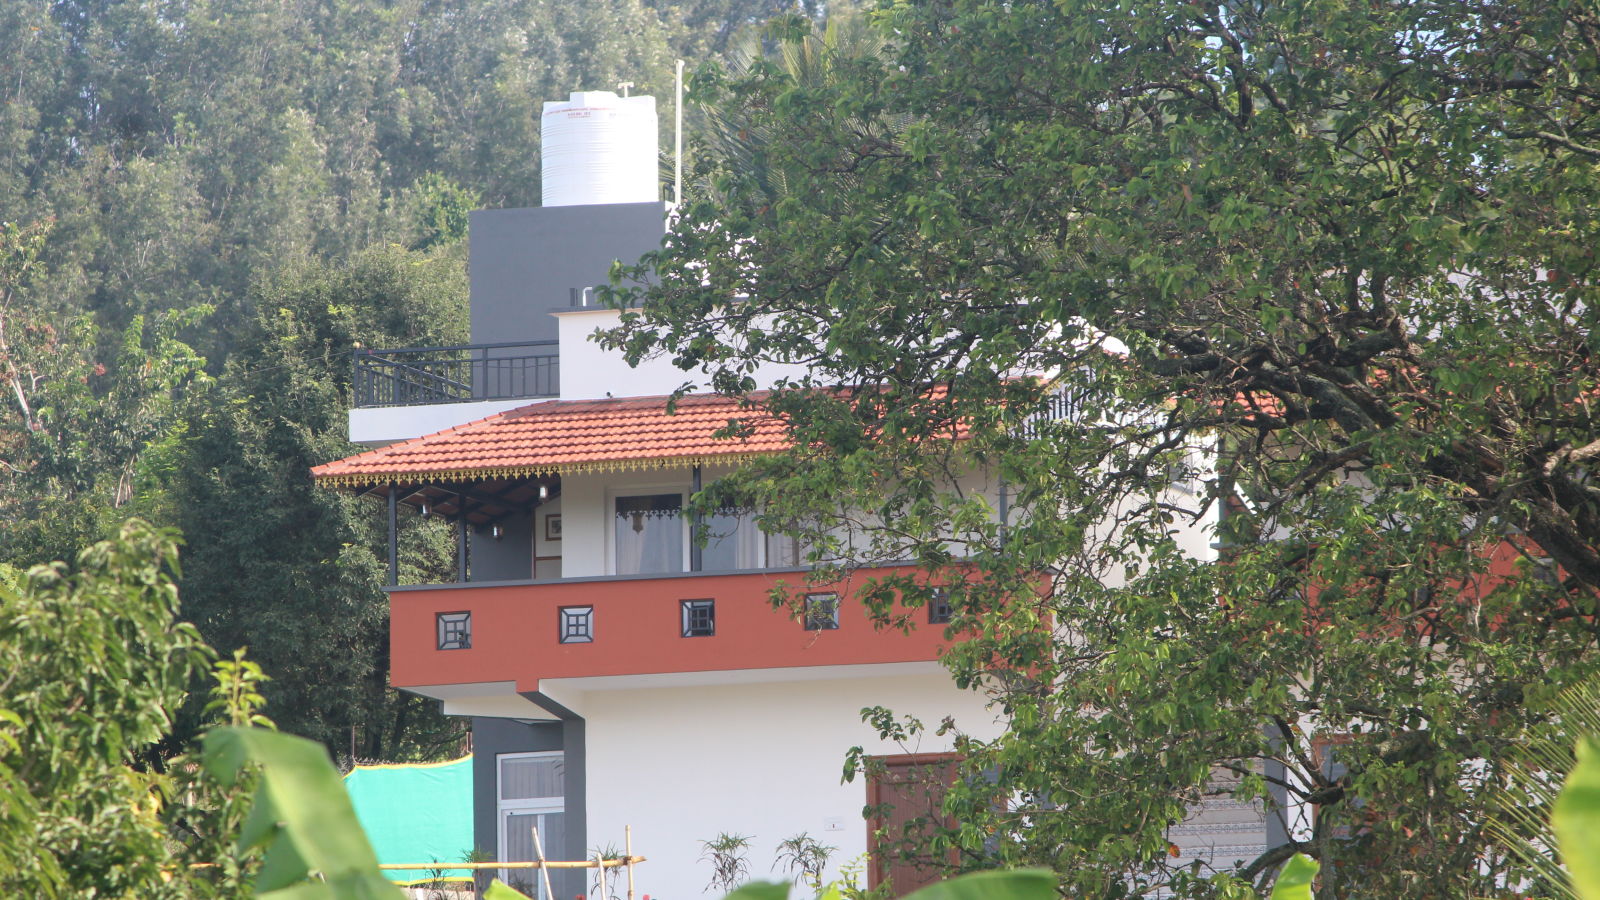 A view of a two-tiered house with an orange upper level amidst green trees